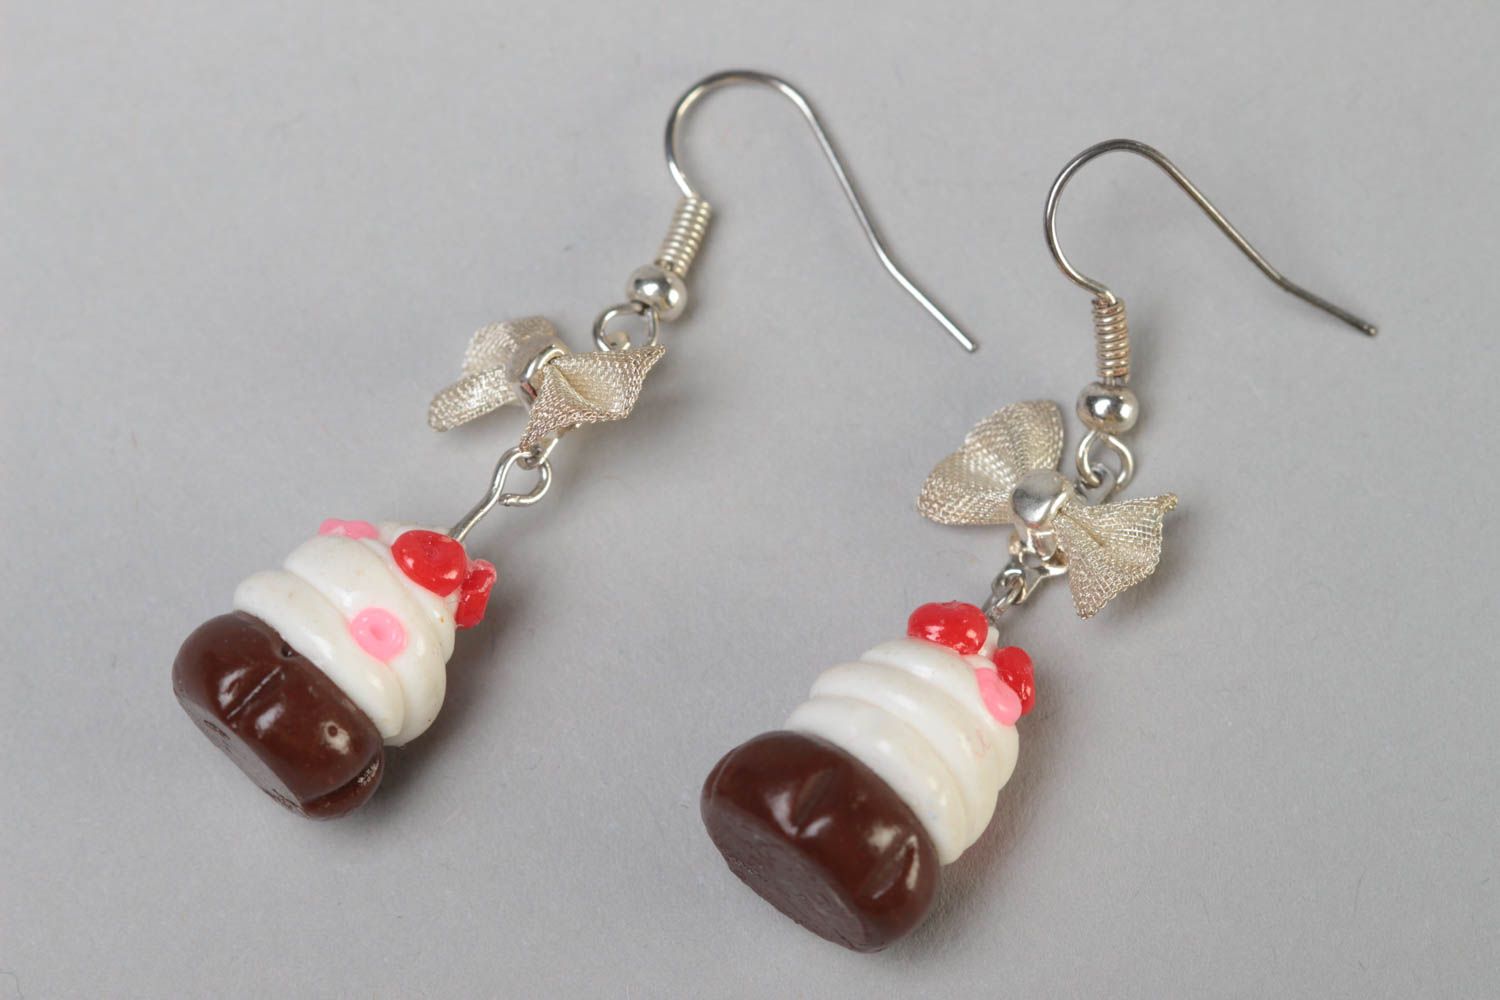 Handmade designer polymer clay dangling earrings with colorful cupcakes photo 2